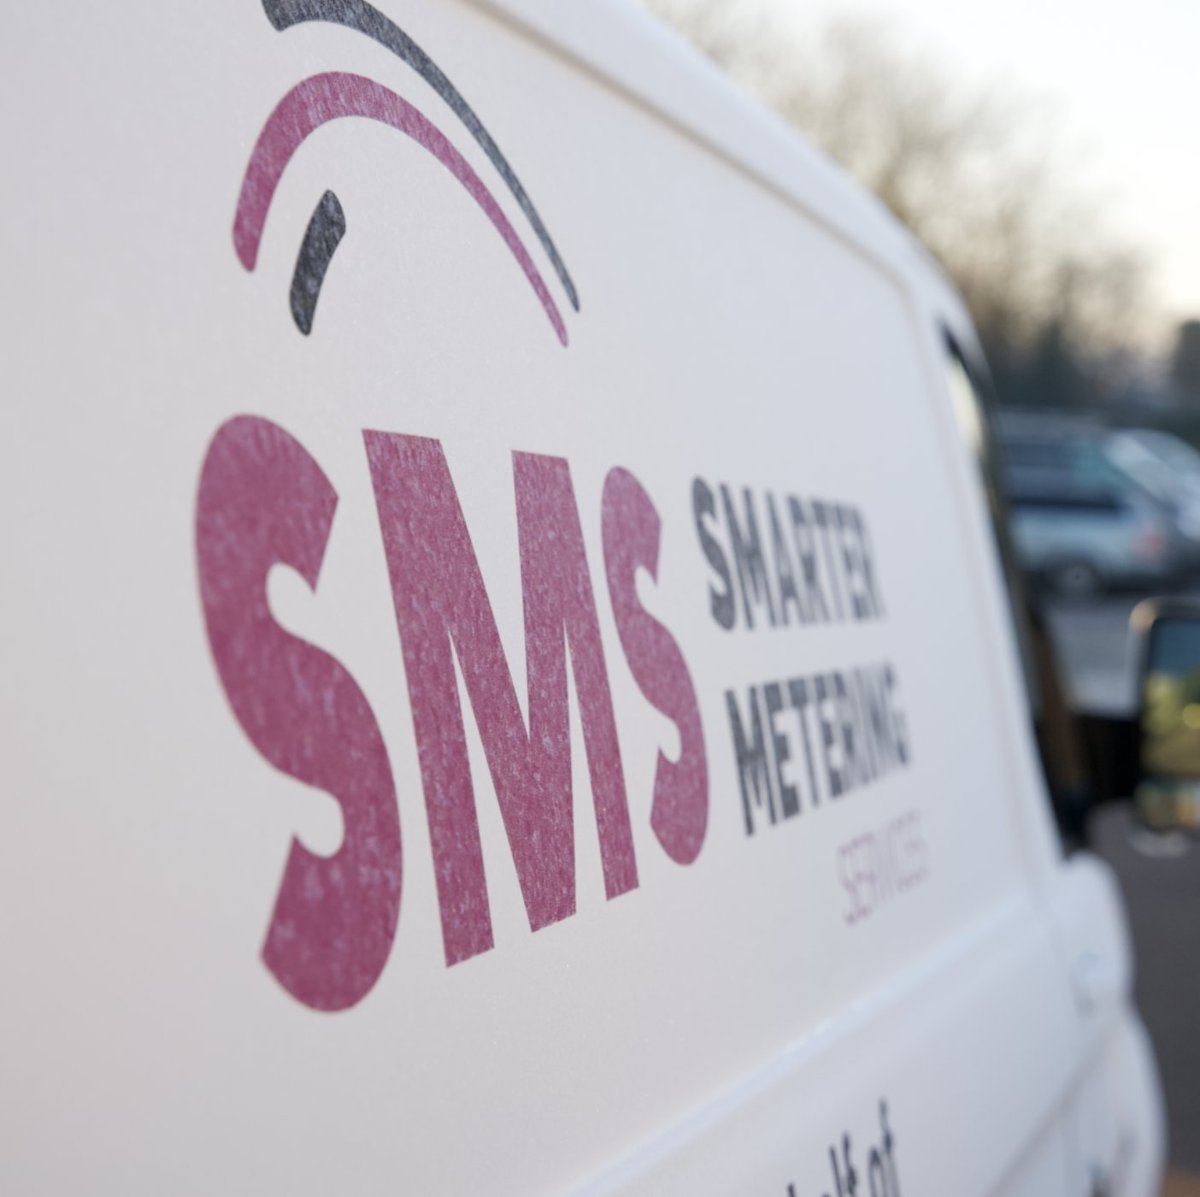 🟣⚪️ We Are Smarter Metering Services 🟣⚪️
Based in Newmarket, Suffolk, but operating nationally! 

#ProudToBe #SmarterMetering